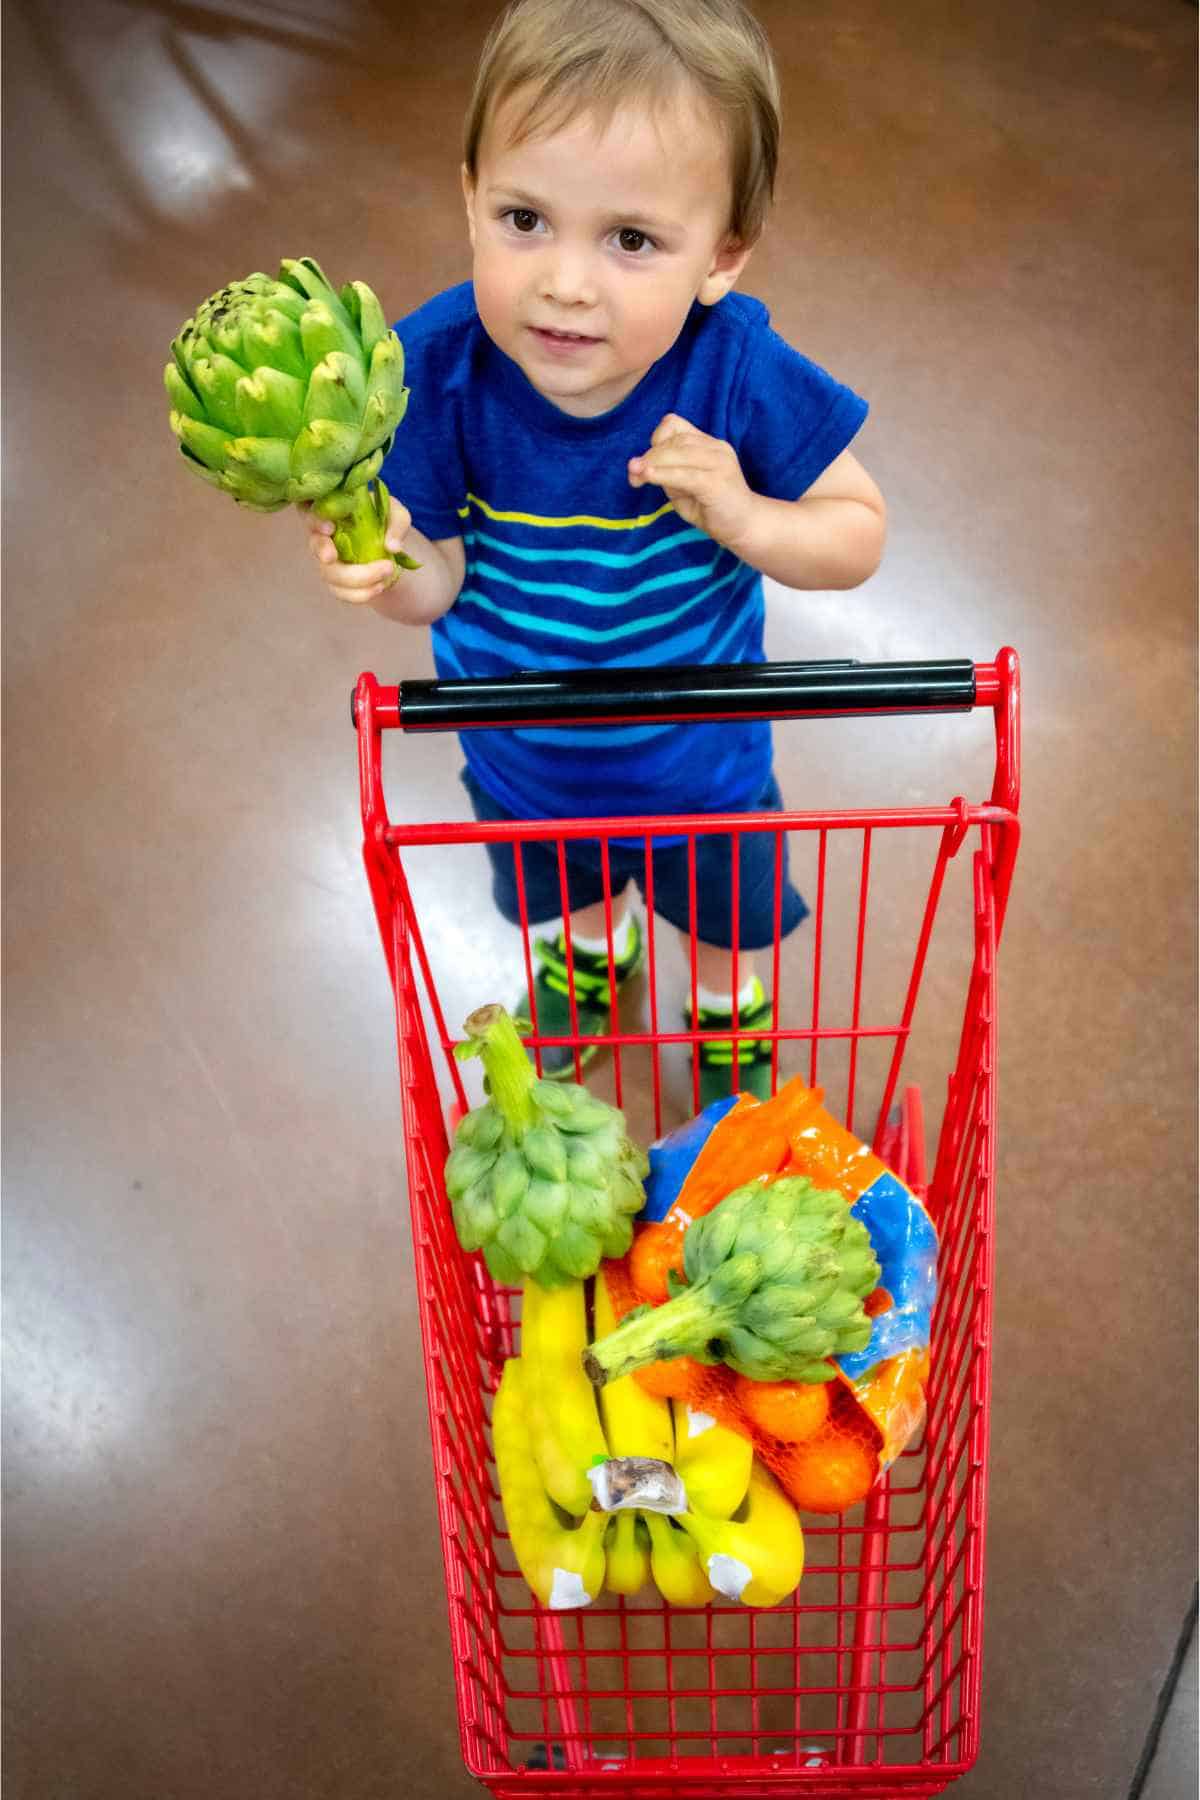 A toddler boy helps with running errands picking up vegetables and placing in his small shopping cart. 